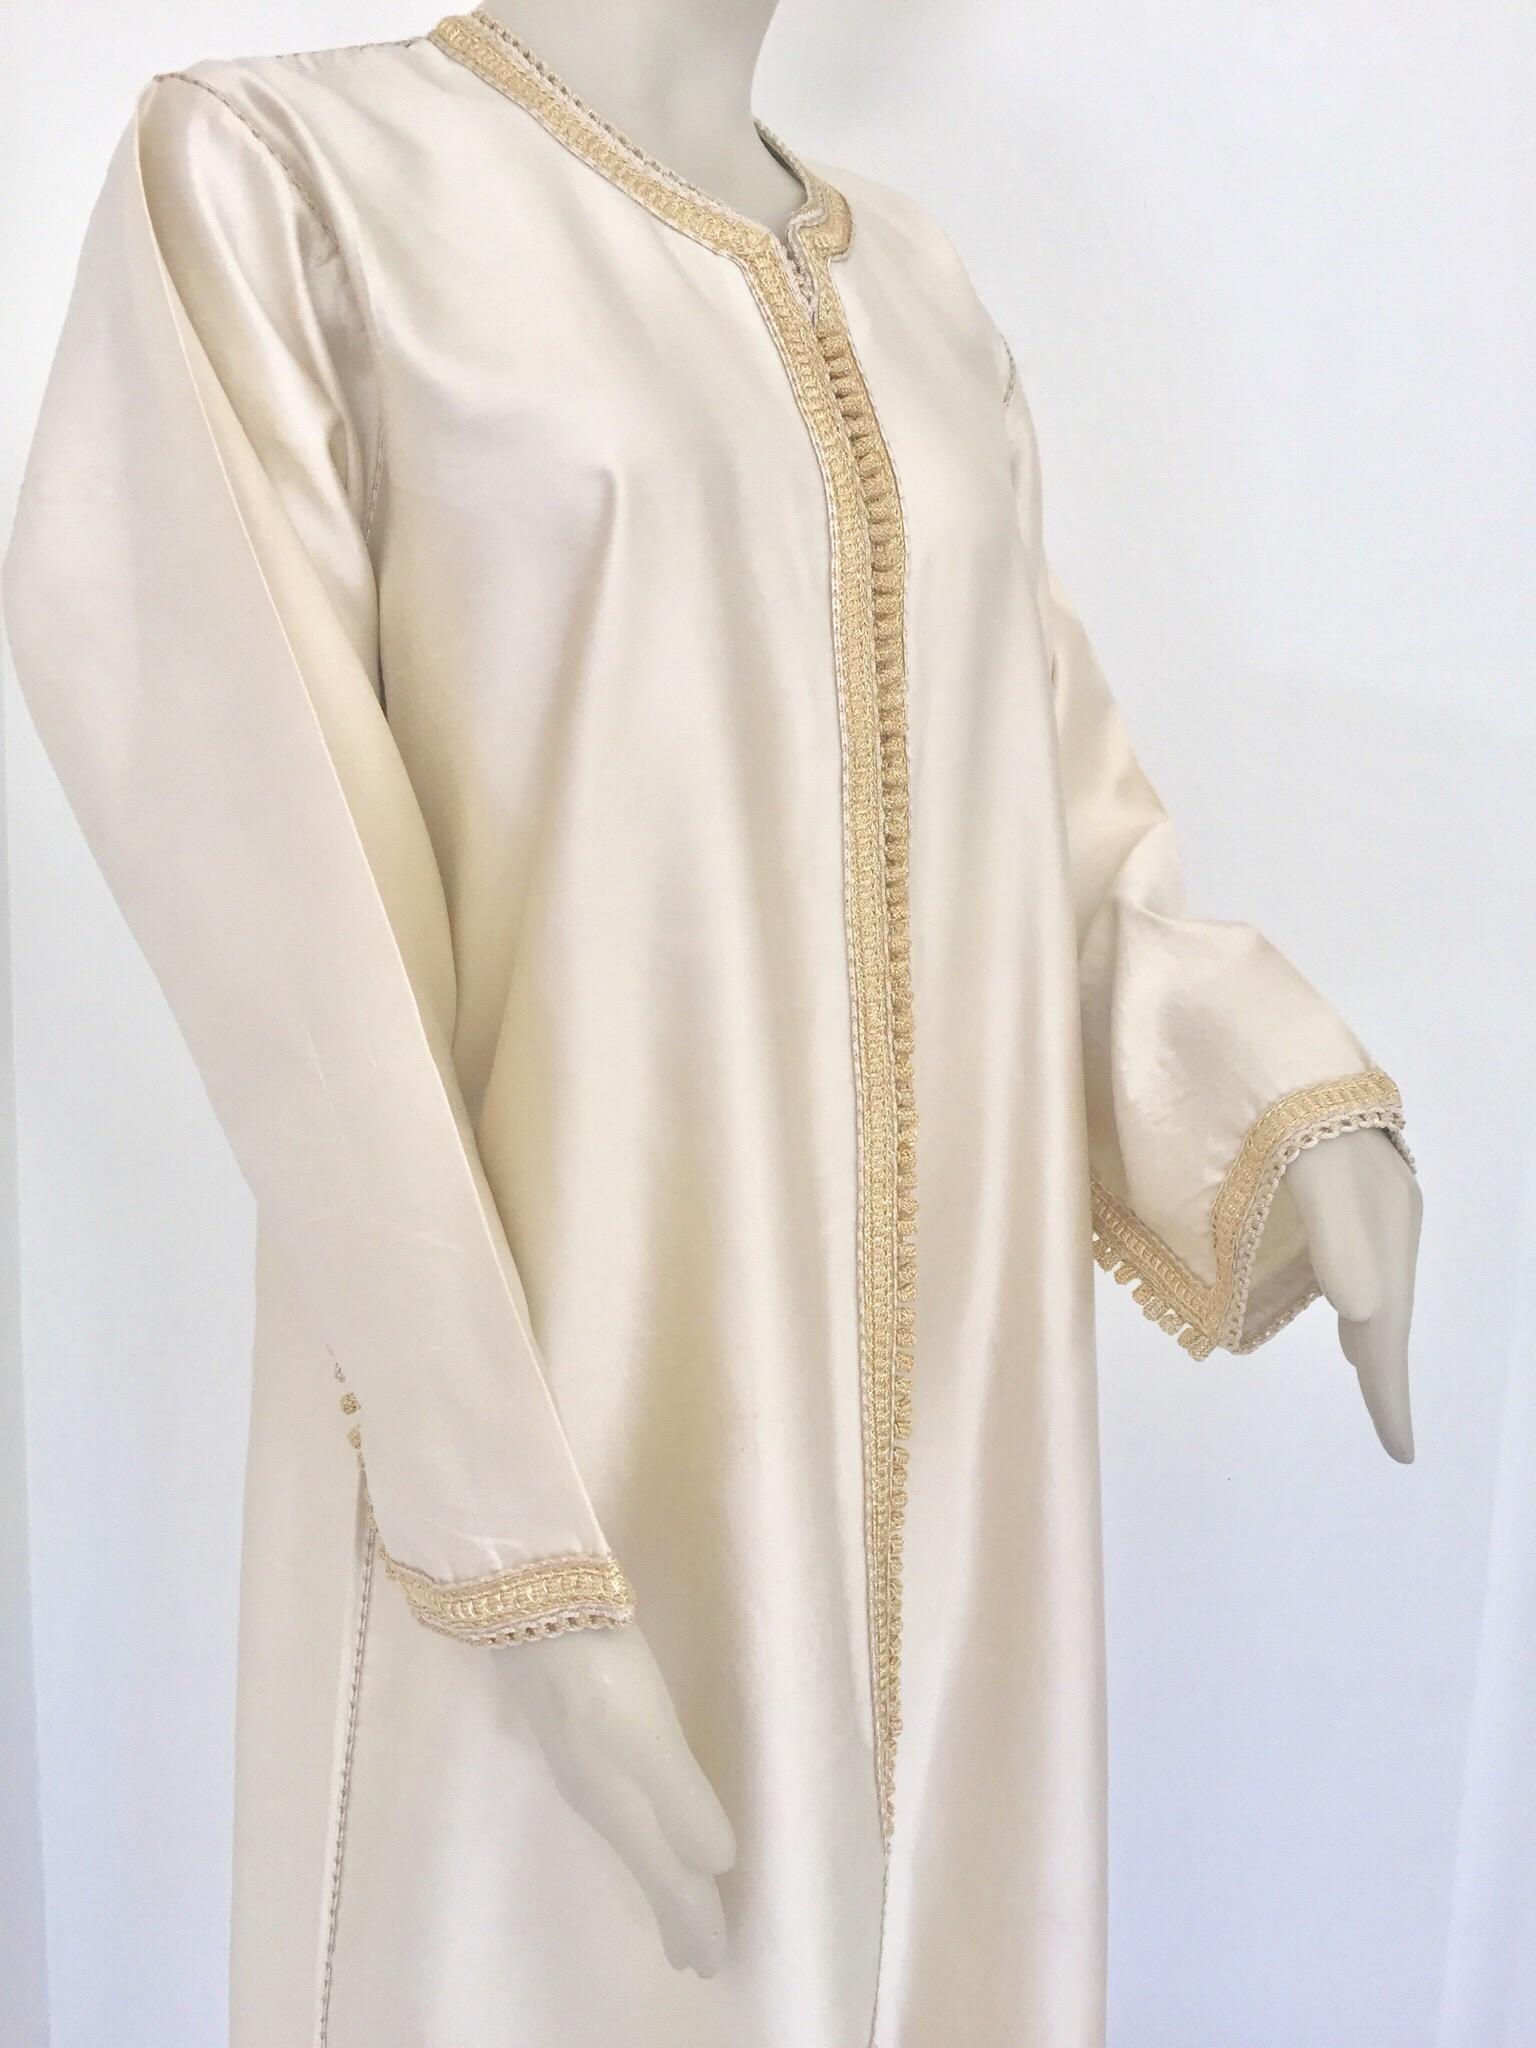 Moroccan Elegant Luxury Dupiono Silk Caftan Gown Maxi Dress In Good Condition For Sale In North Hollywood, CA